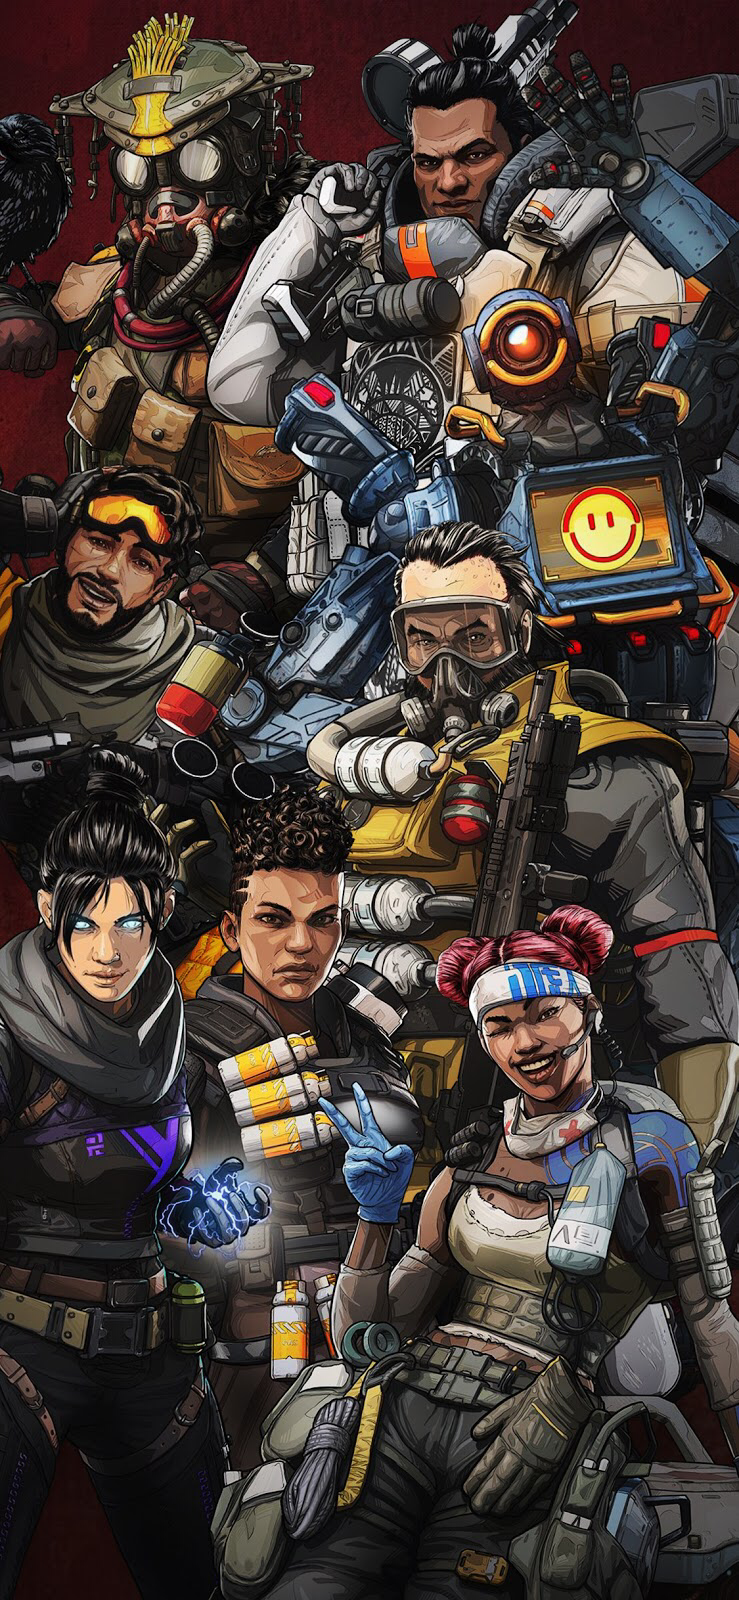 I need an Apex Legends wallpaper (hd) preferably for the iPhone